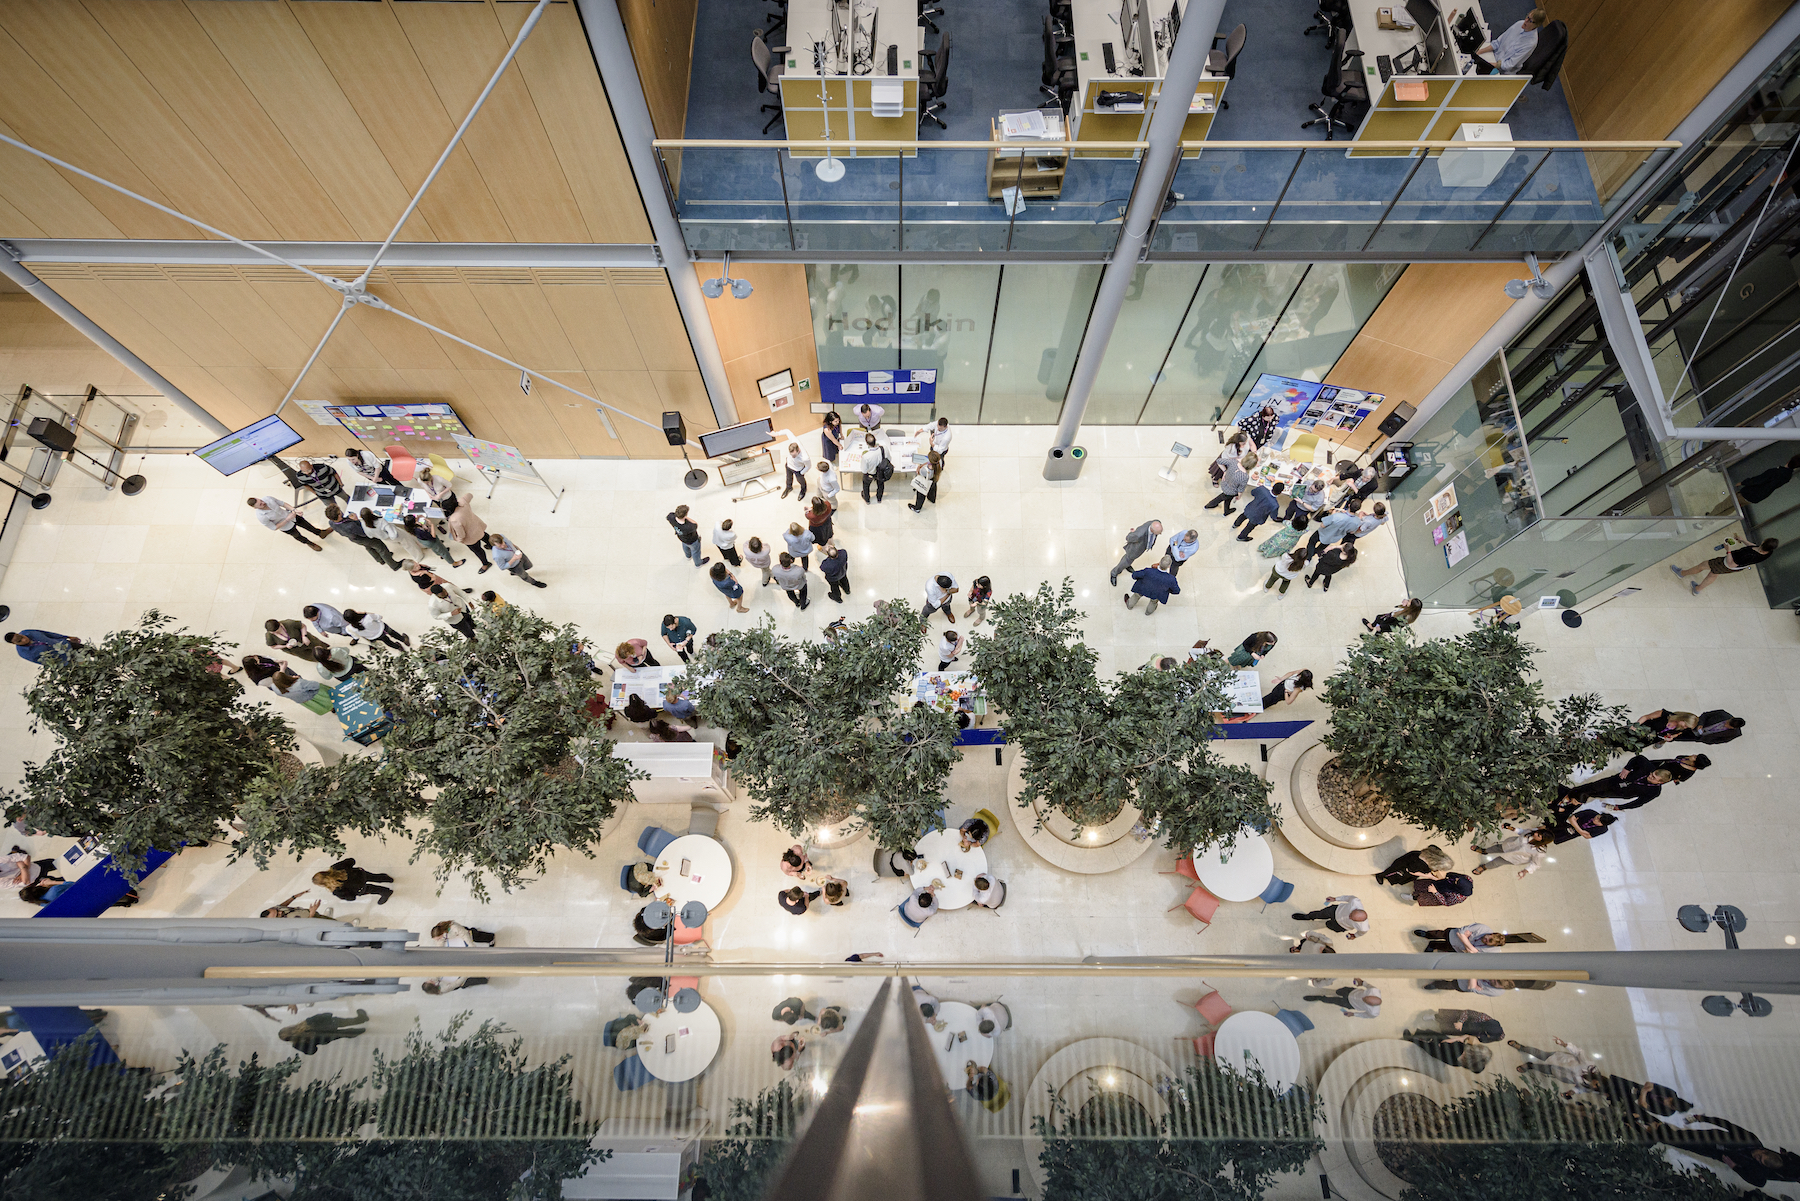 An aerial photo of the Wellcome entrance hall. Trees line the centre of a long atrium, people are gathered in small groups around information stands. It's bright and airy.